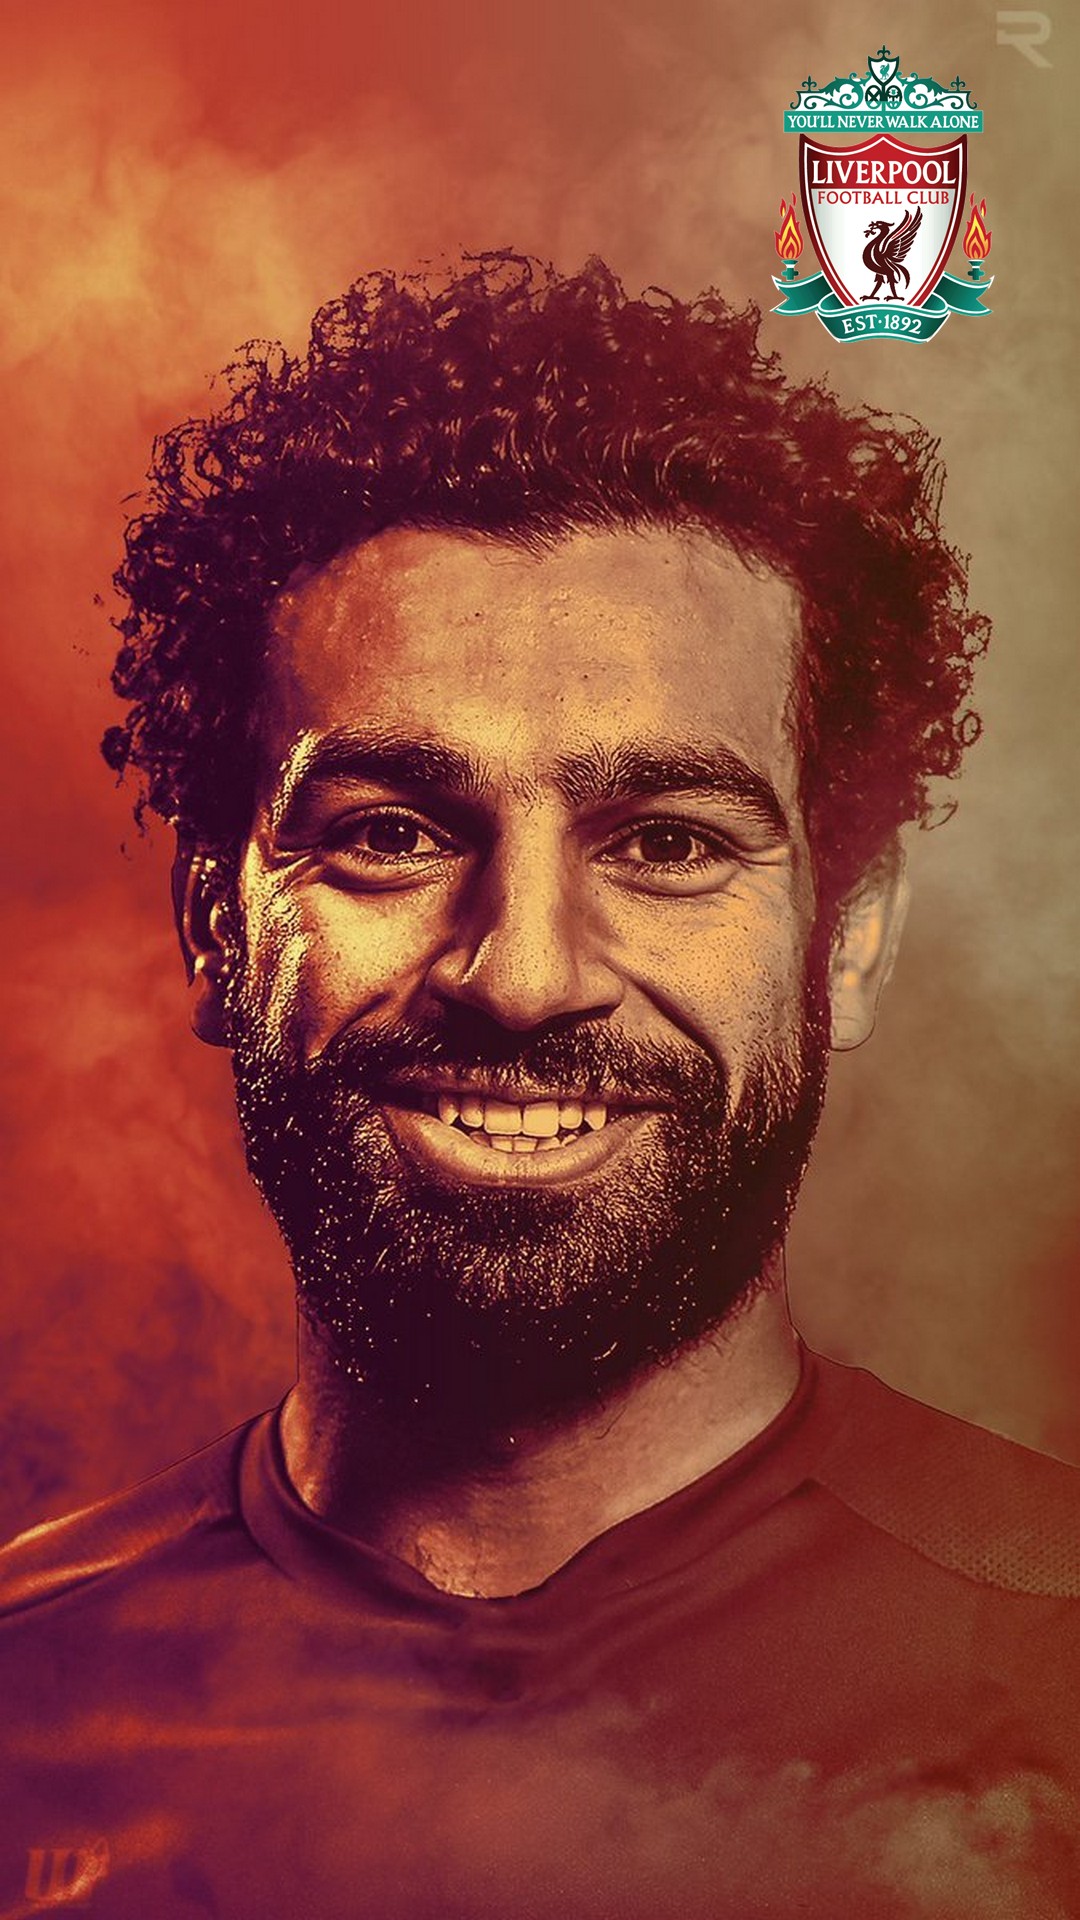 Wallpaper Salah Liverpool iPhone with resolution 1080X1920 pixel. You can make this wallpaper for your iPhone 5, 6, 7, 8, X backgrounds, Mobile Screensaver, or iPad Lock Screen